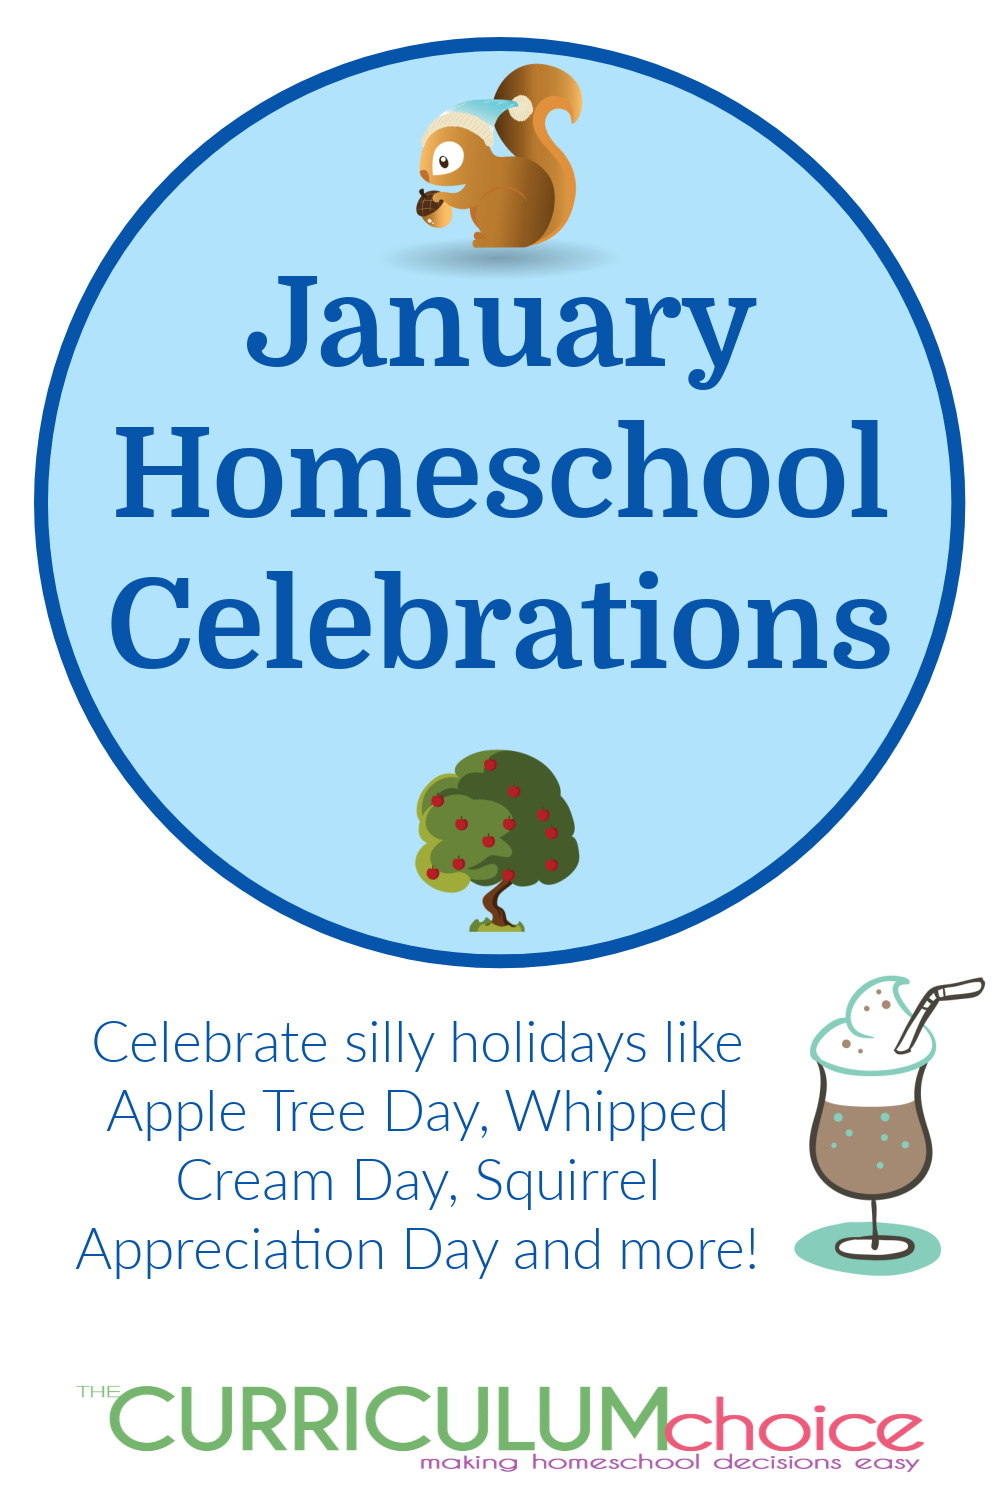 January Homeschool Celebrations - Celebrate silly holidays like Whipped Cream Day, Squirrel Appreciation Day, and Apple Tree Day!